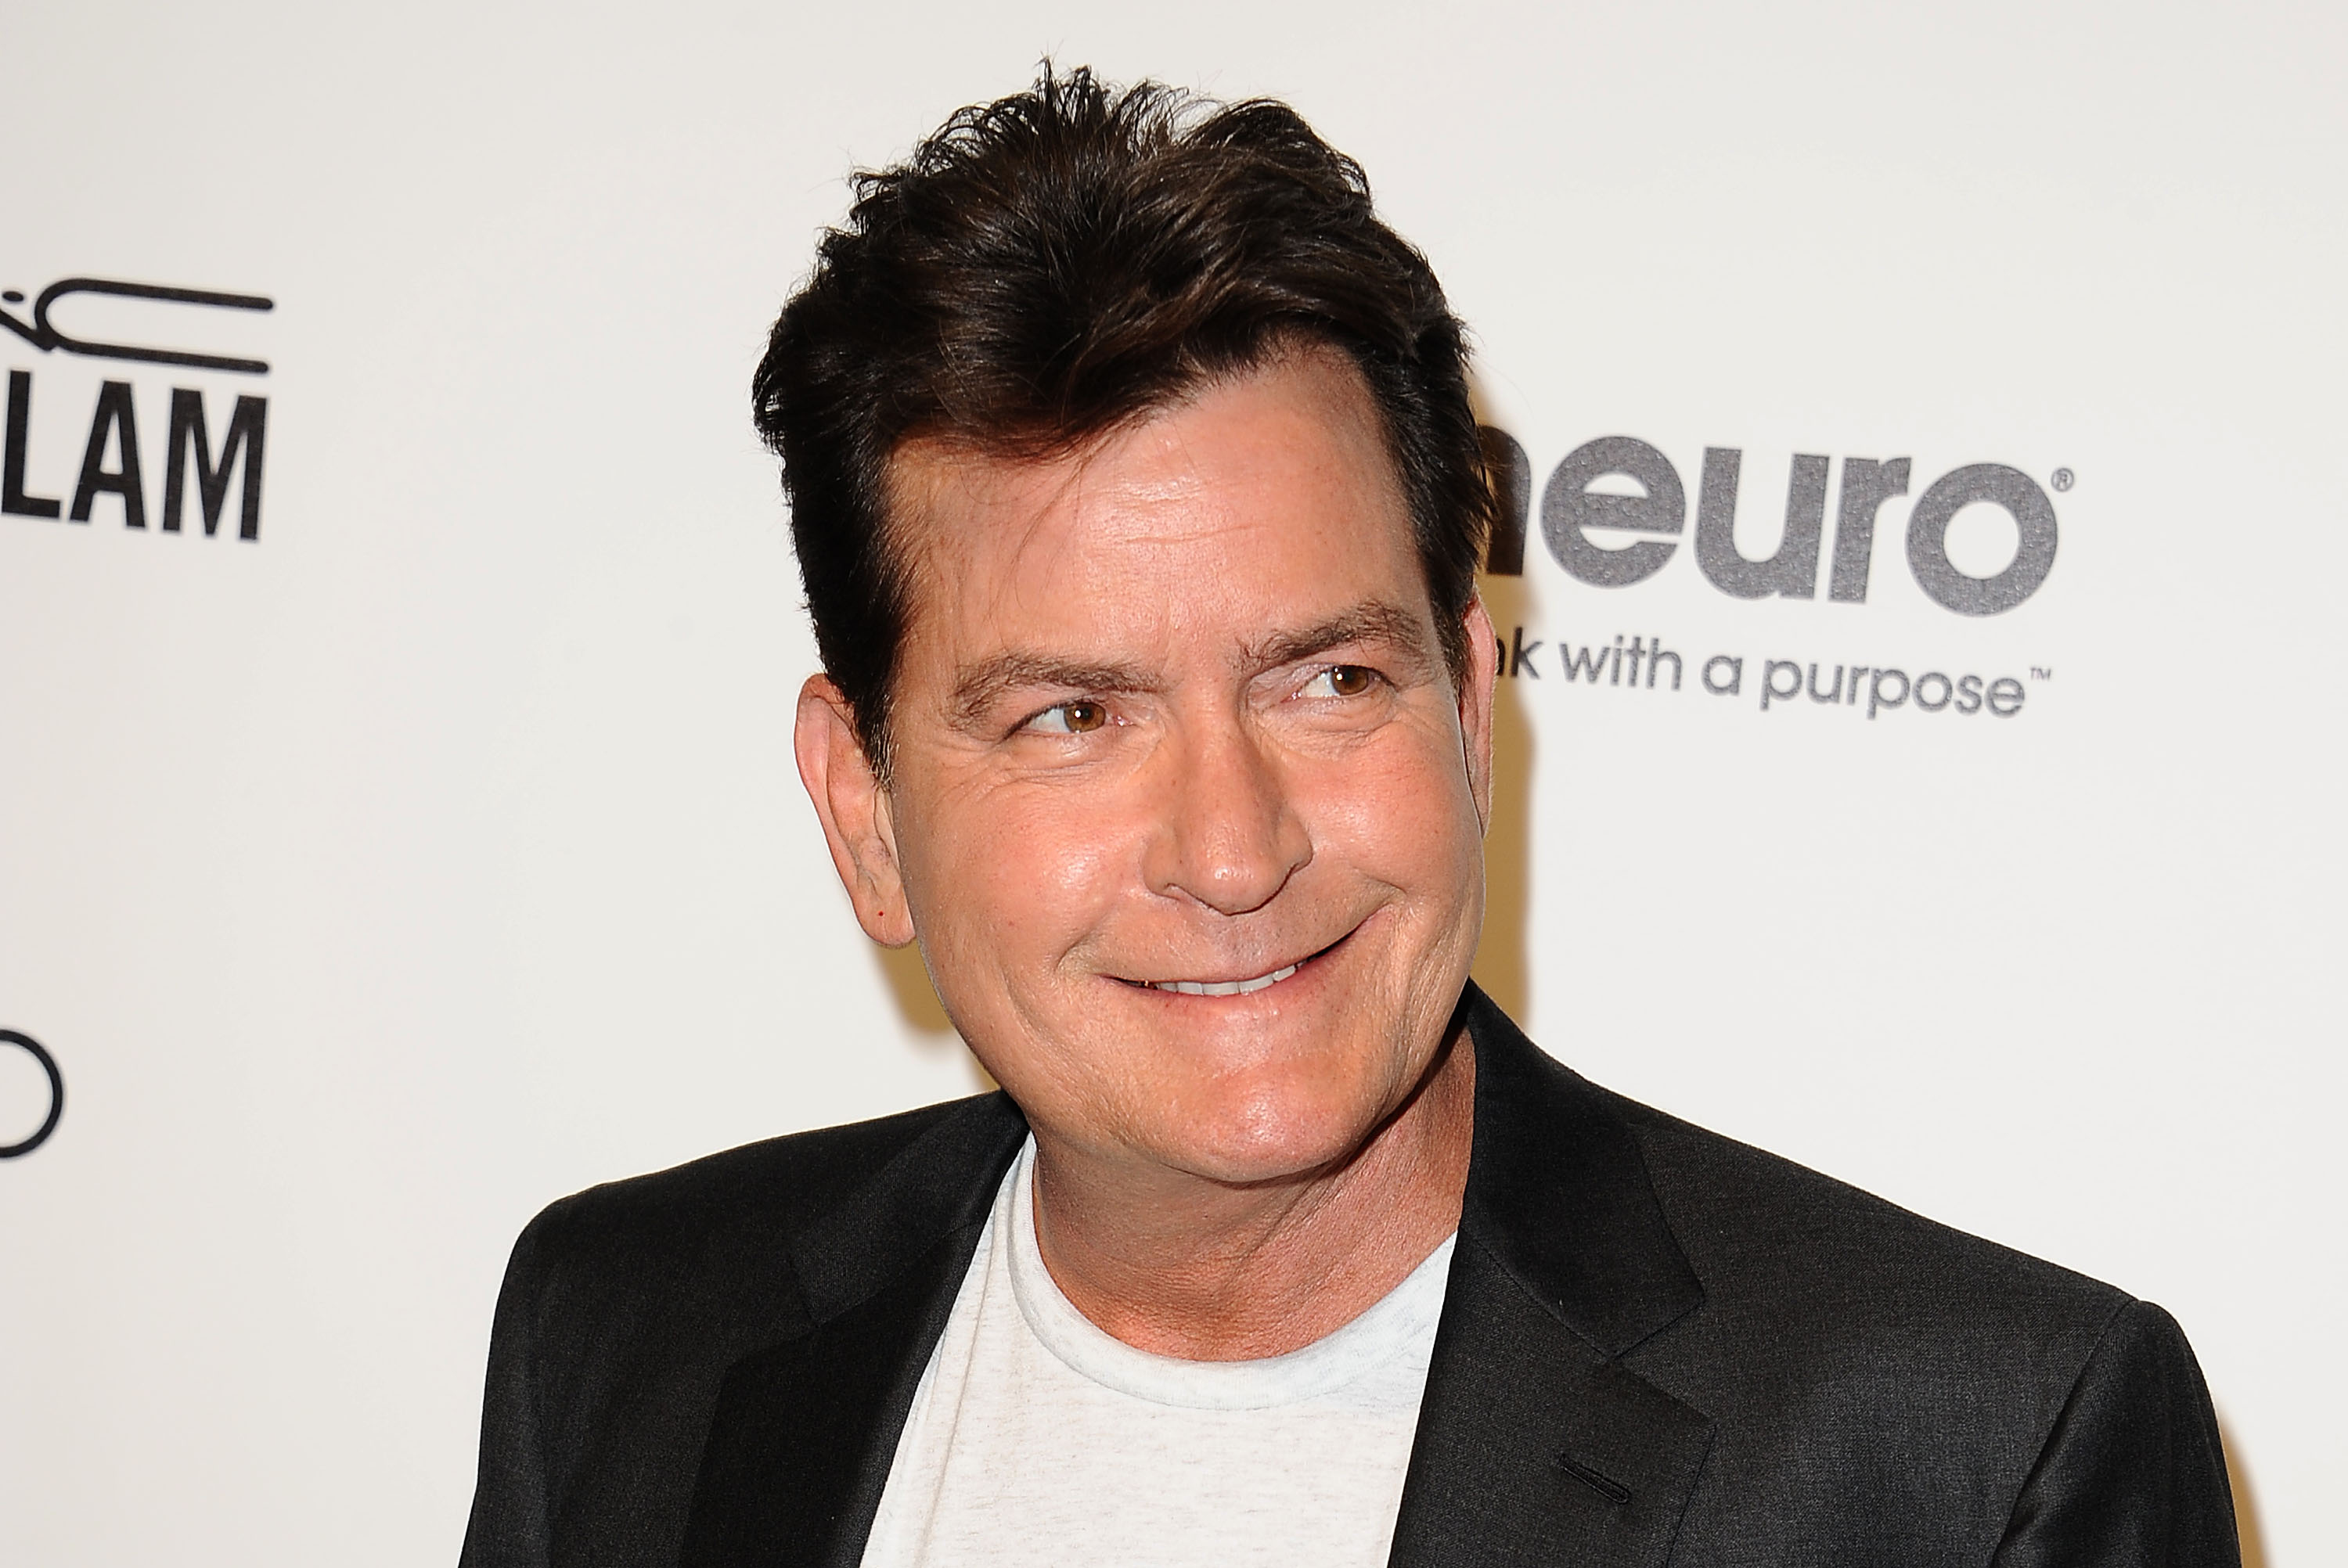 Actor Charlie Sheen attends the 24th annual Elton John AIDS Foundation's Oscar viewing party on Feb. 28, 2016 in West Hollywood, Calif. (Jason LaVeris—Getty Images)